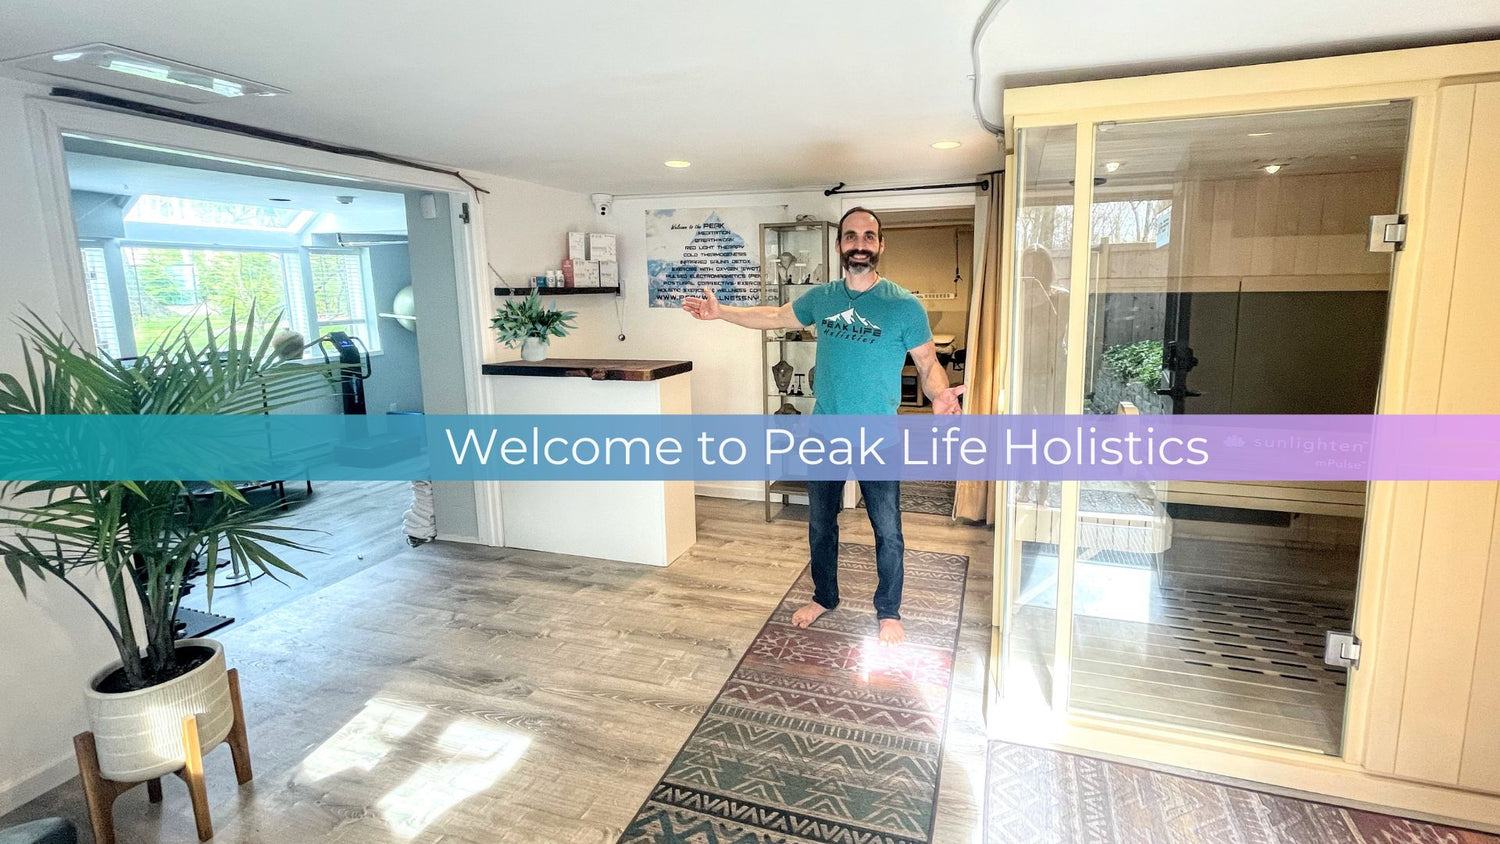 Welcome to Peak Life Holistics in Somers